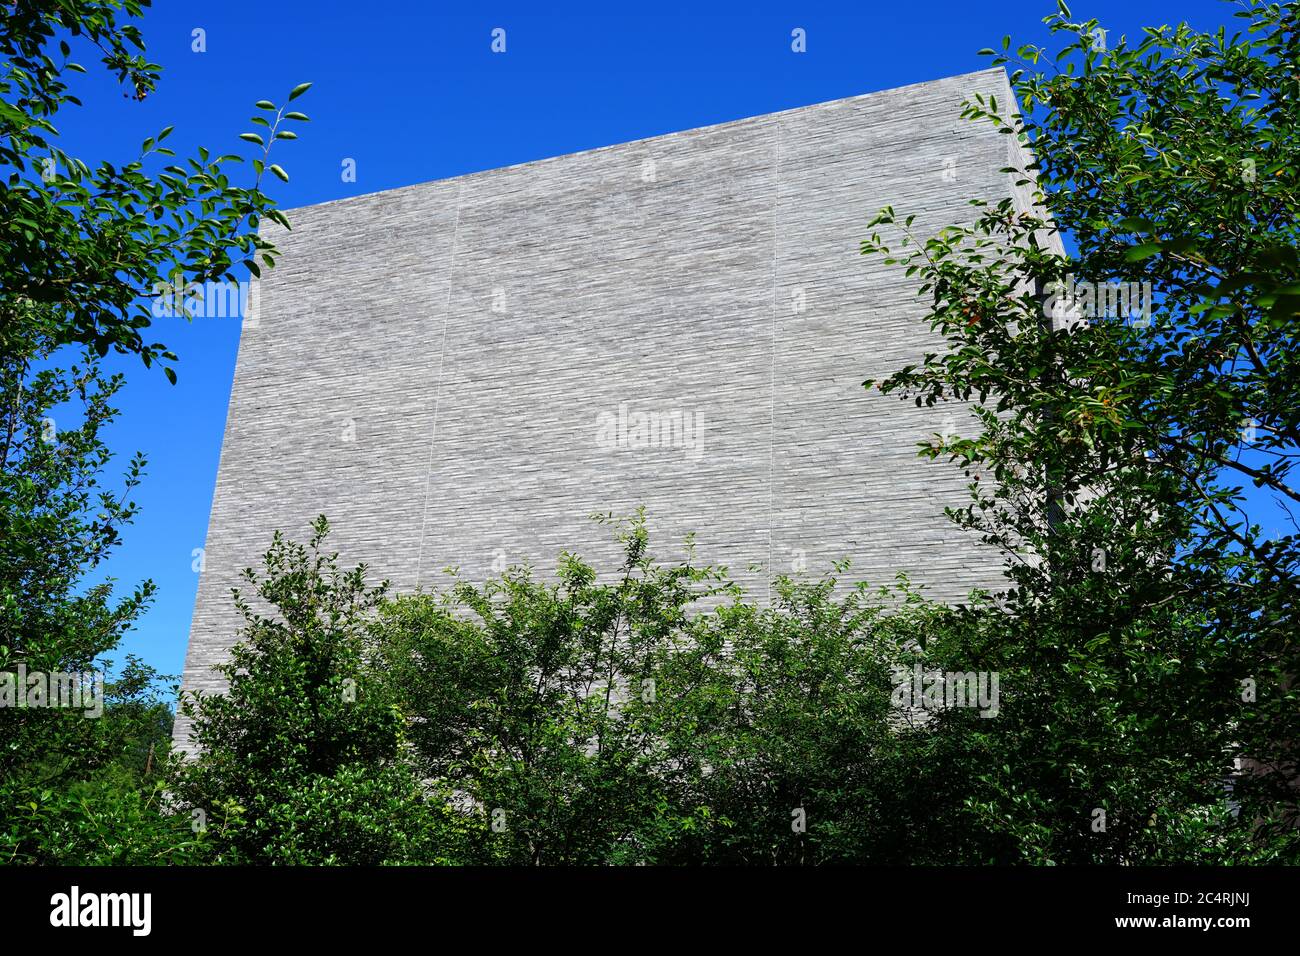 PRINCETON, NJ -14 JUN 2020- View of the Andlinger Center for Energy and the Environment, designed by Tod Williams Billie Tsien architects, on the camp Stock Photo